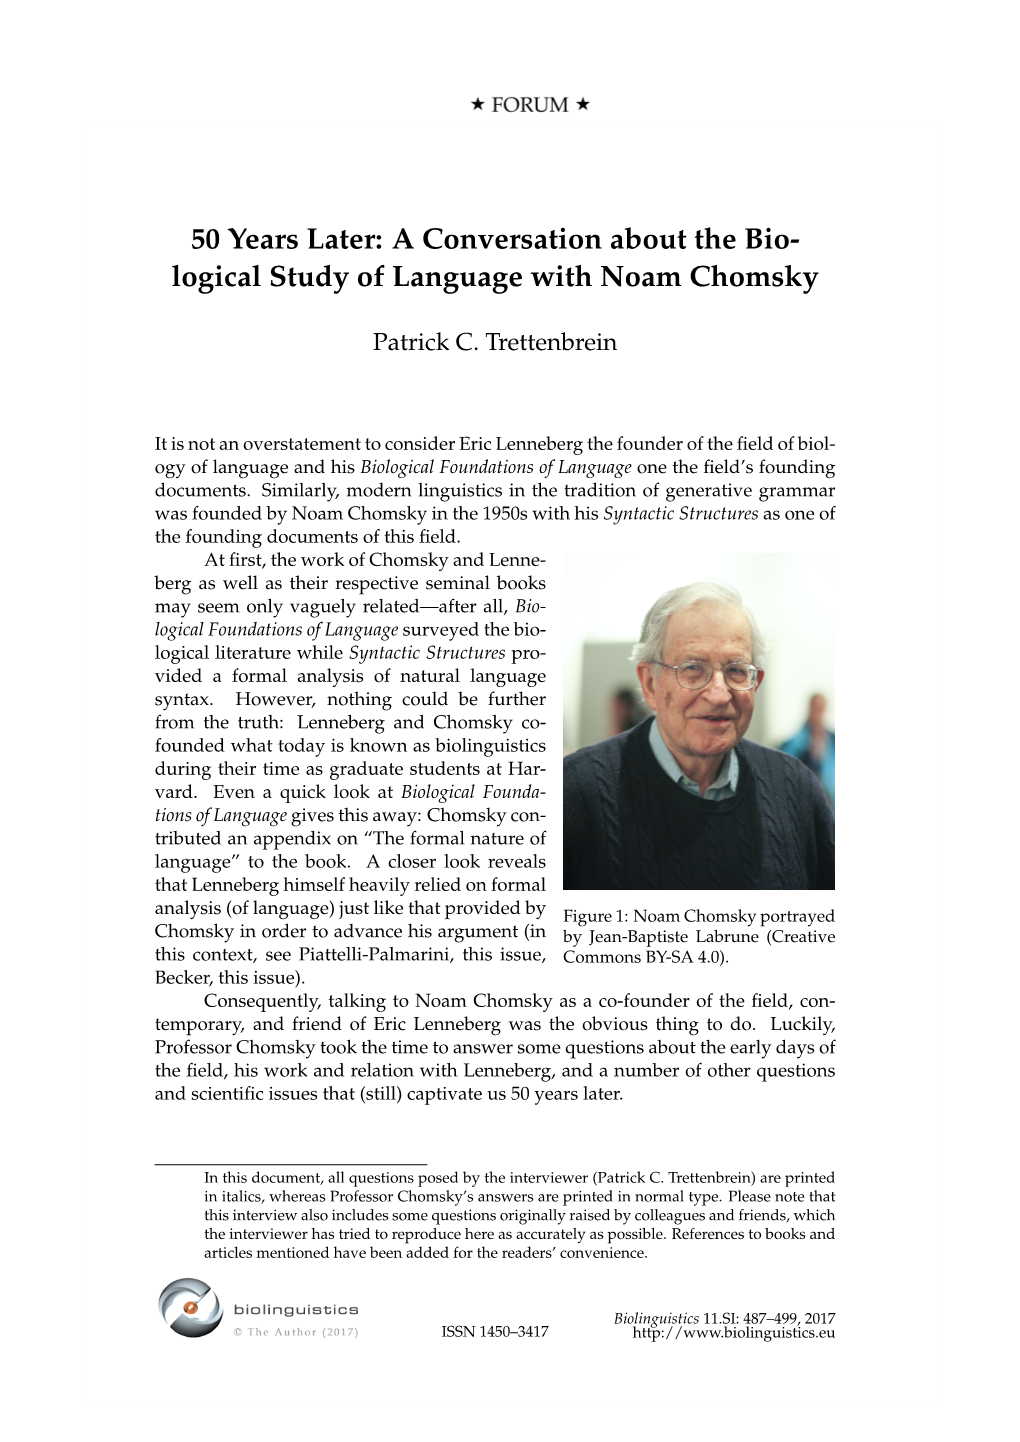 A Conversation About the Biological Study of Language with Noam